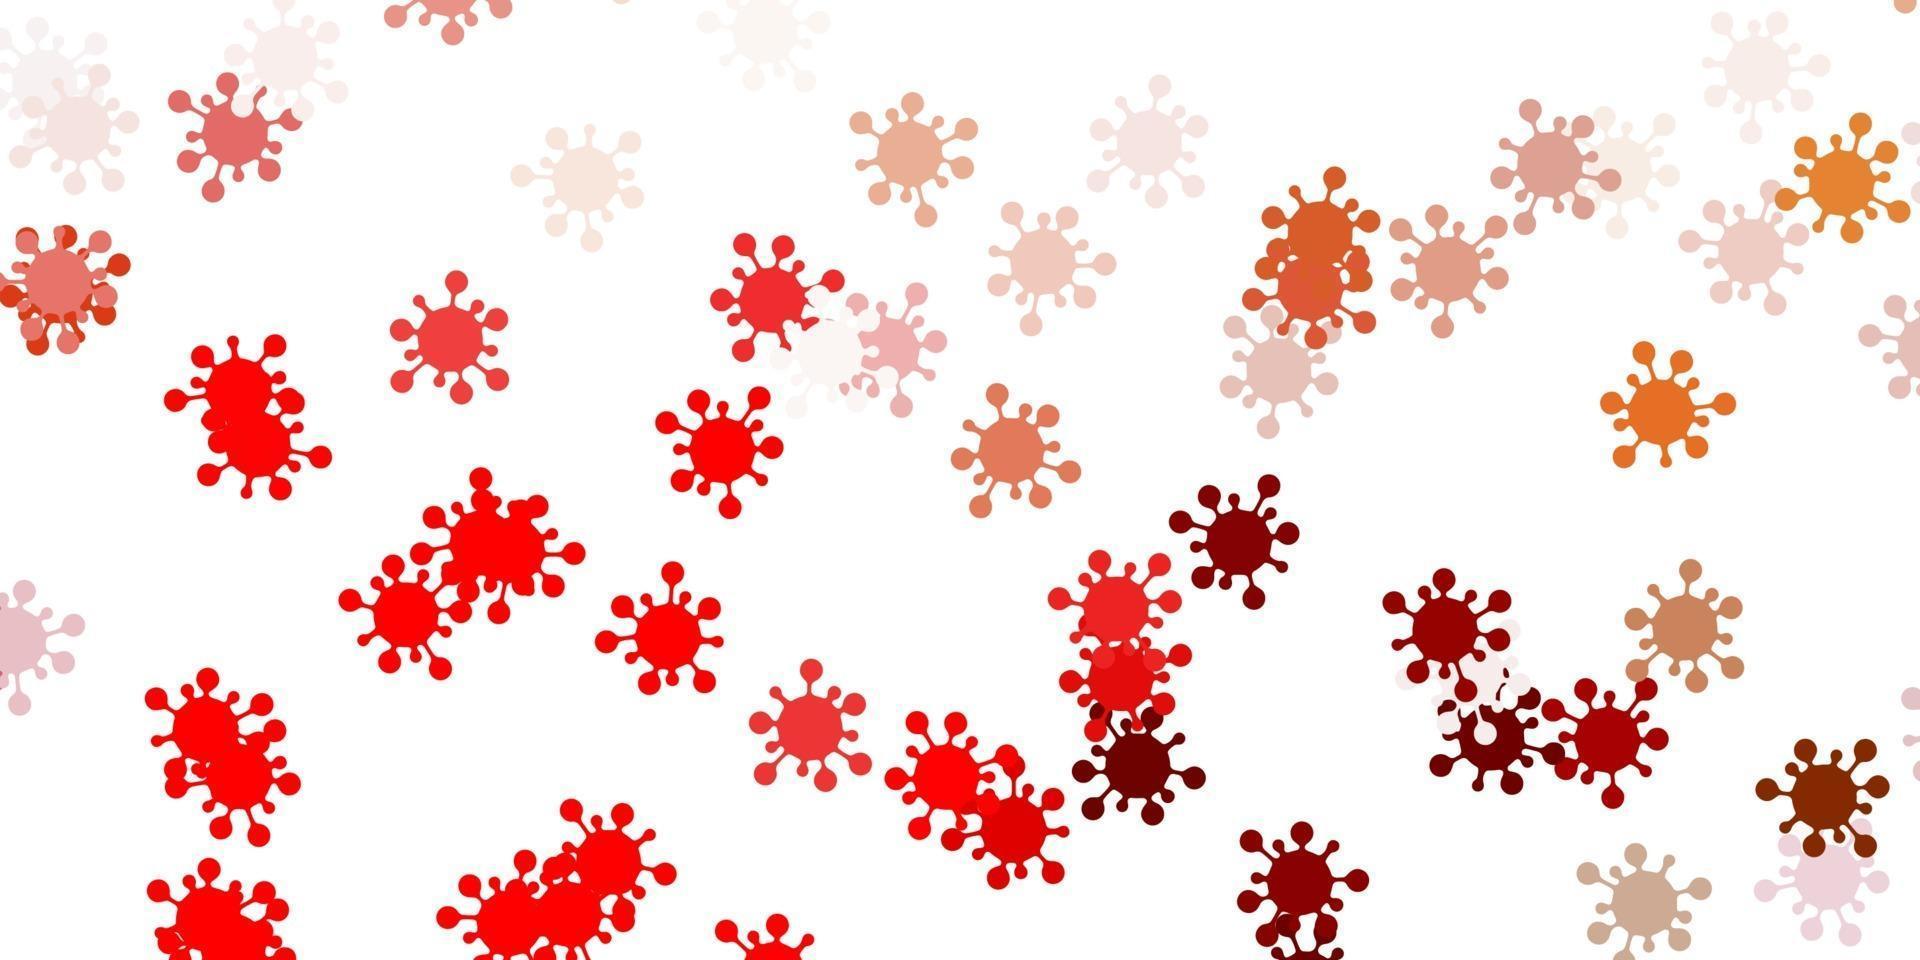 Light red, yellow vector template with flu signs.